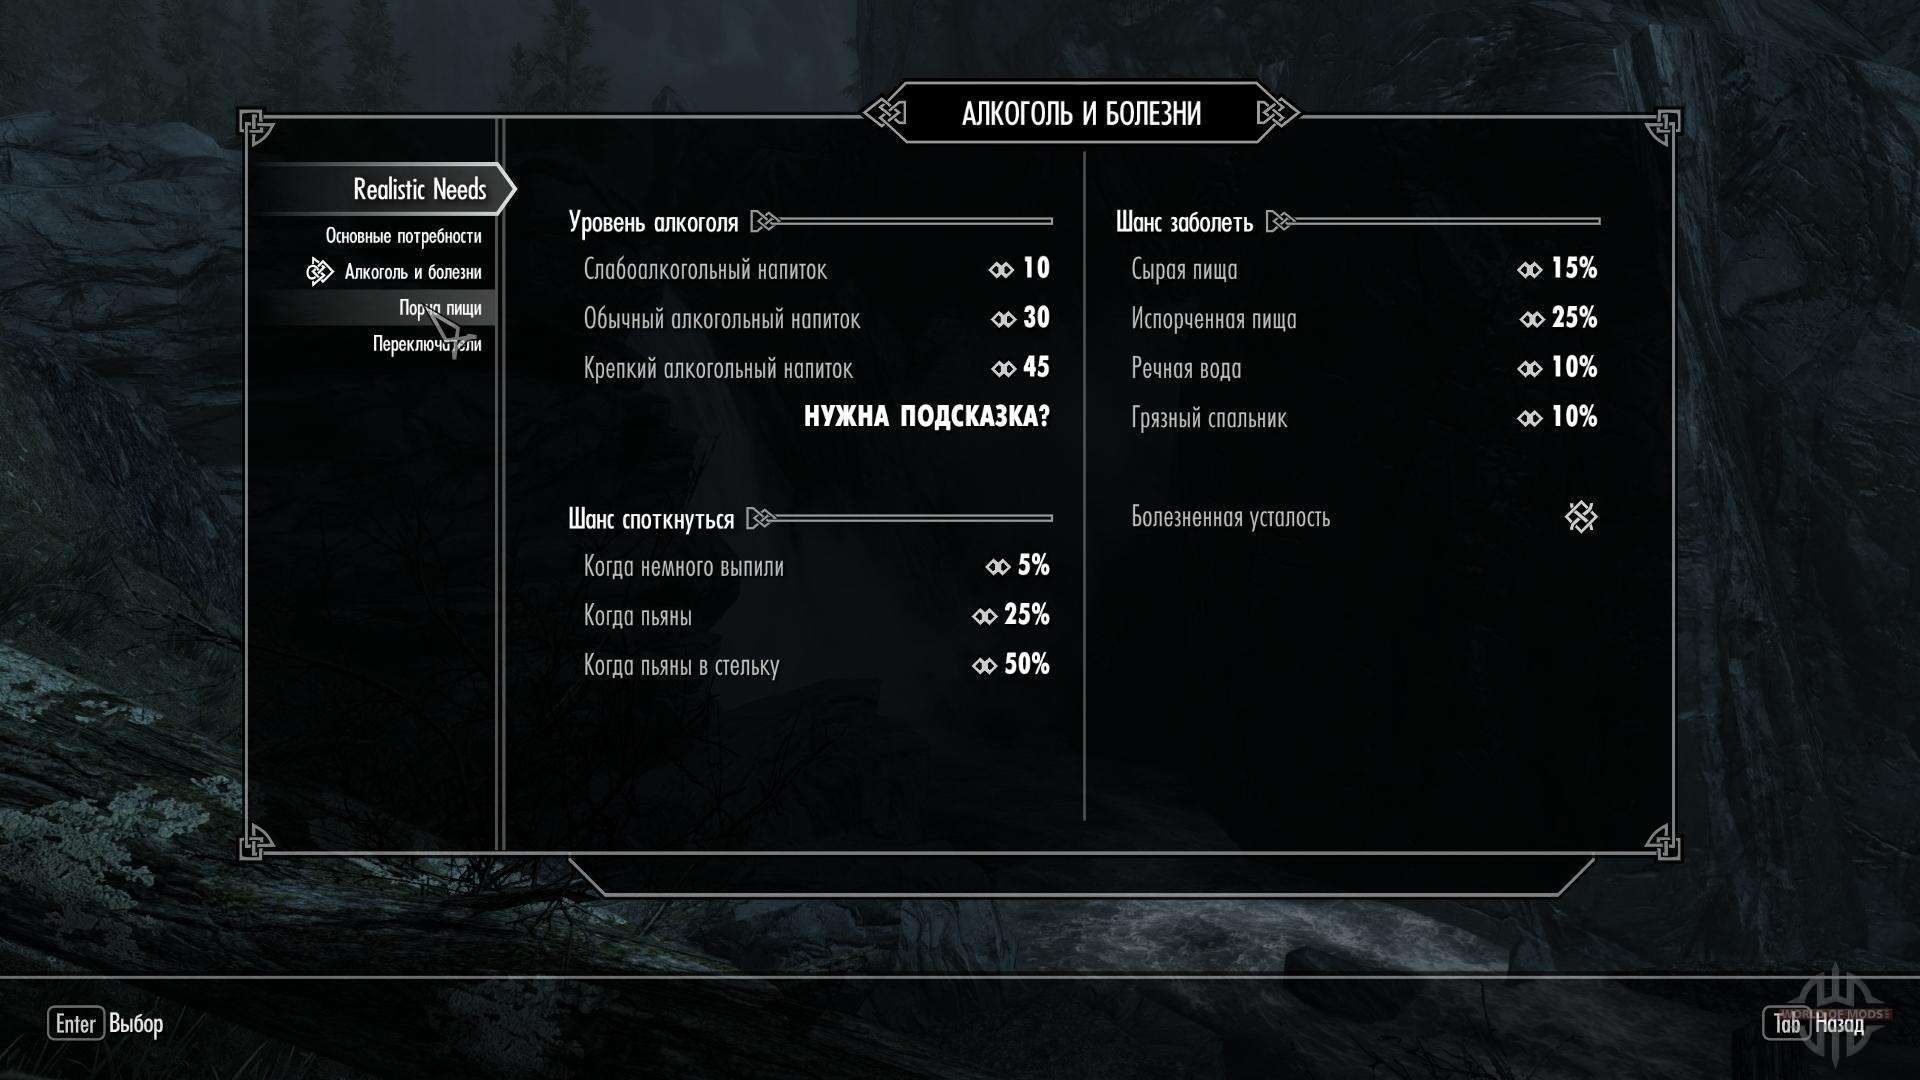 Realistic needs and diseases 1.9.9 for Skyrim.